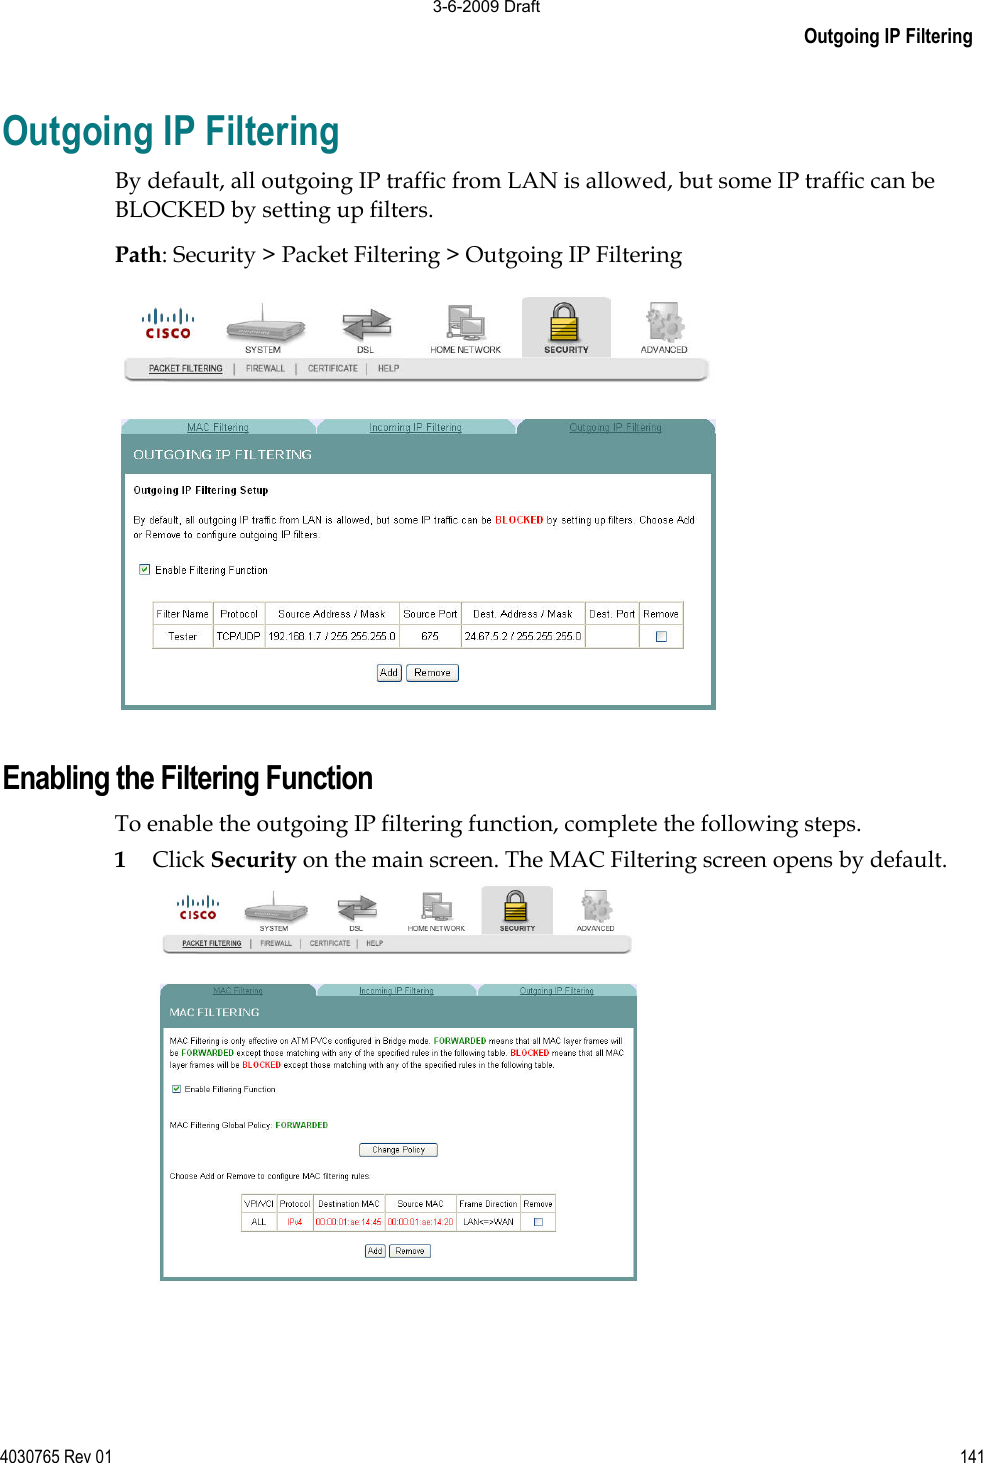 Outgoing IP Filtering 4030765 Rev 01 141Outgoing IP Filtering By default, all outgoing IP traffic from LAN is allowed, but some IP traffic can be BLOCKED by setting up filters. Path: Security &gt; Packet Filtering &gt; Outgoing IP Filtering Enabling the Filtering Function To enable the outgoing IP filtering function, complete the following steps. 1Click Security on the main screen. The MAC Filtering screen opens by default. 3-6-2009 Draft